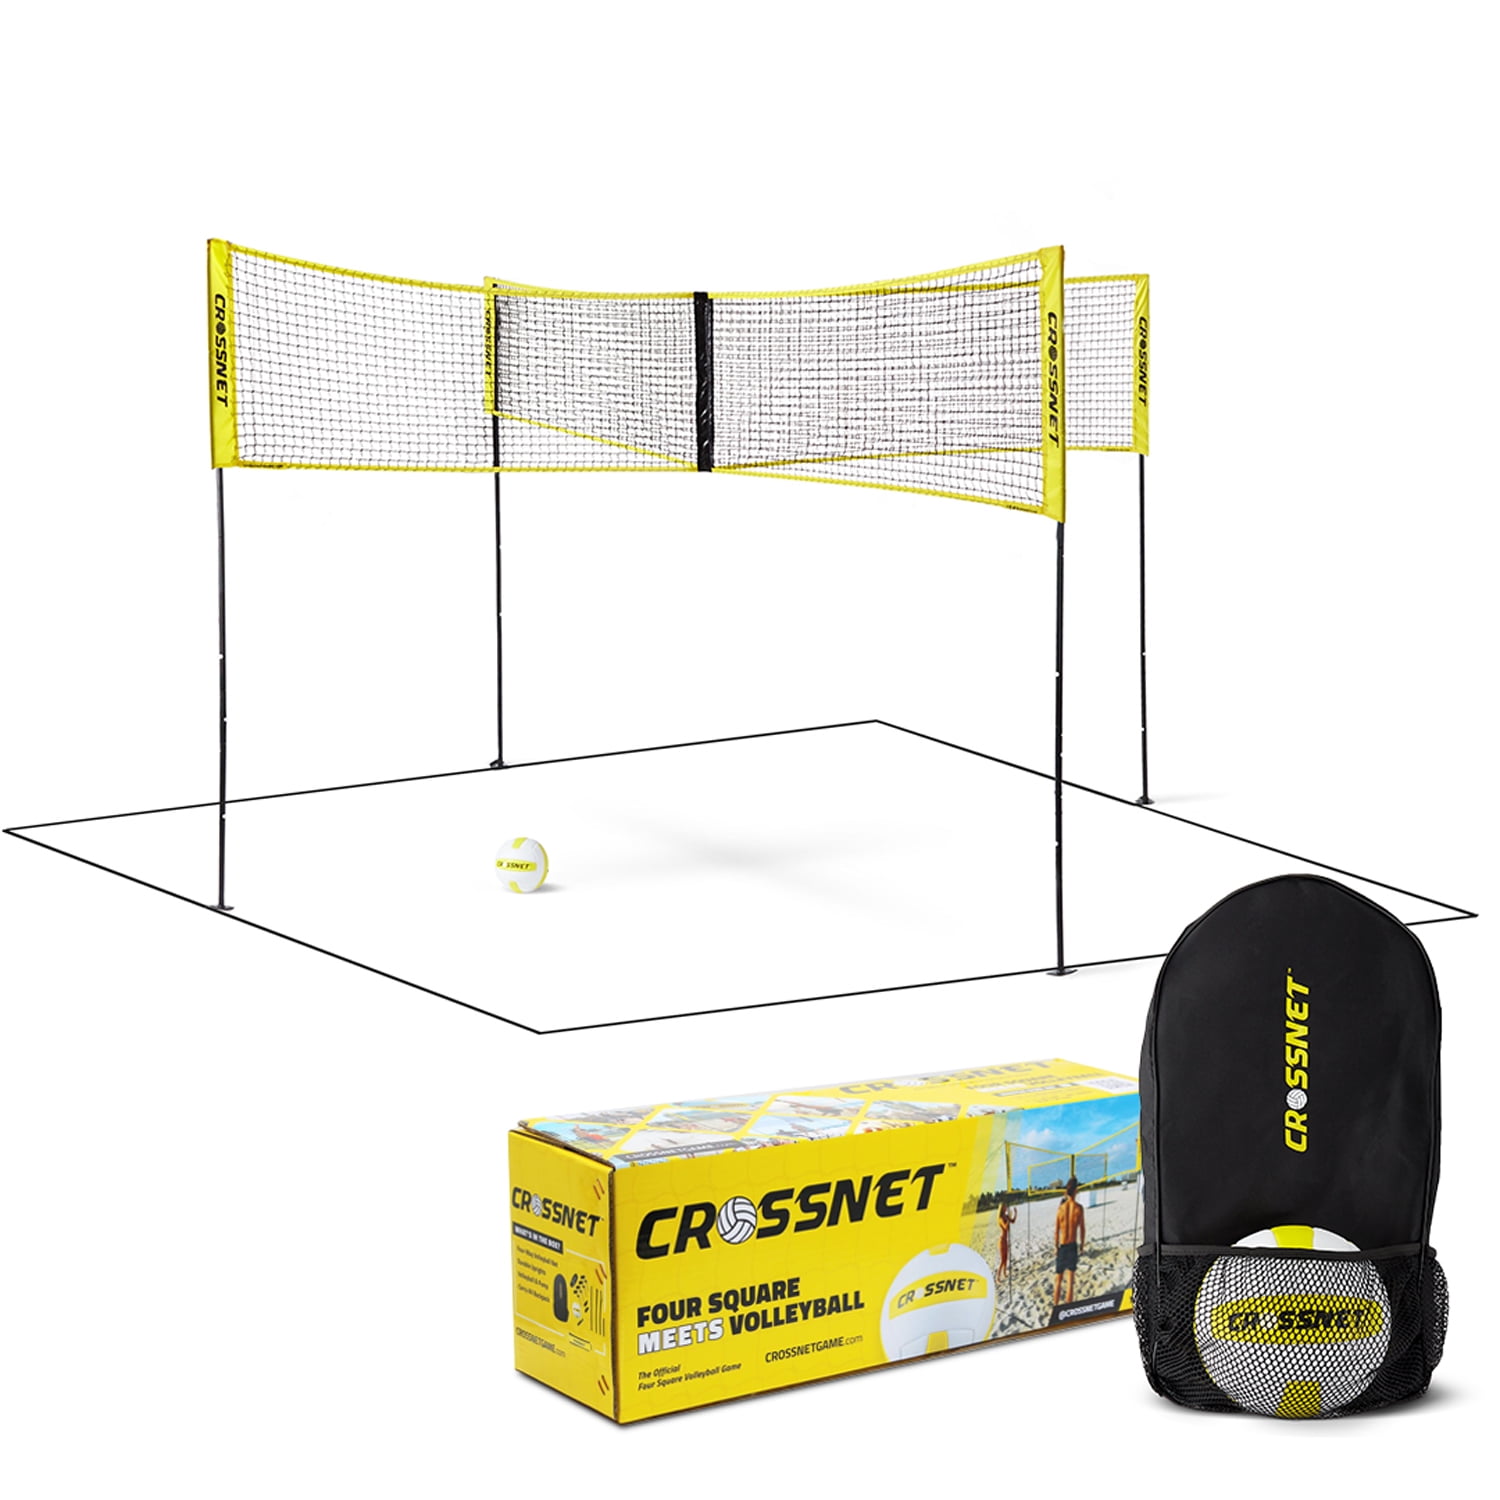 T.face Volleyball NET Courtyard Garden Campus Four Square Meets Volleyball NET,59 X 20 Inch PE Durable Cross Volley Ball Training NET Sports Badminton Game NET for Beach Party,Travel（No Poles） 